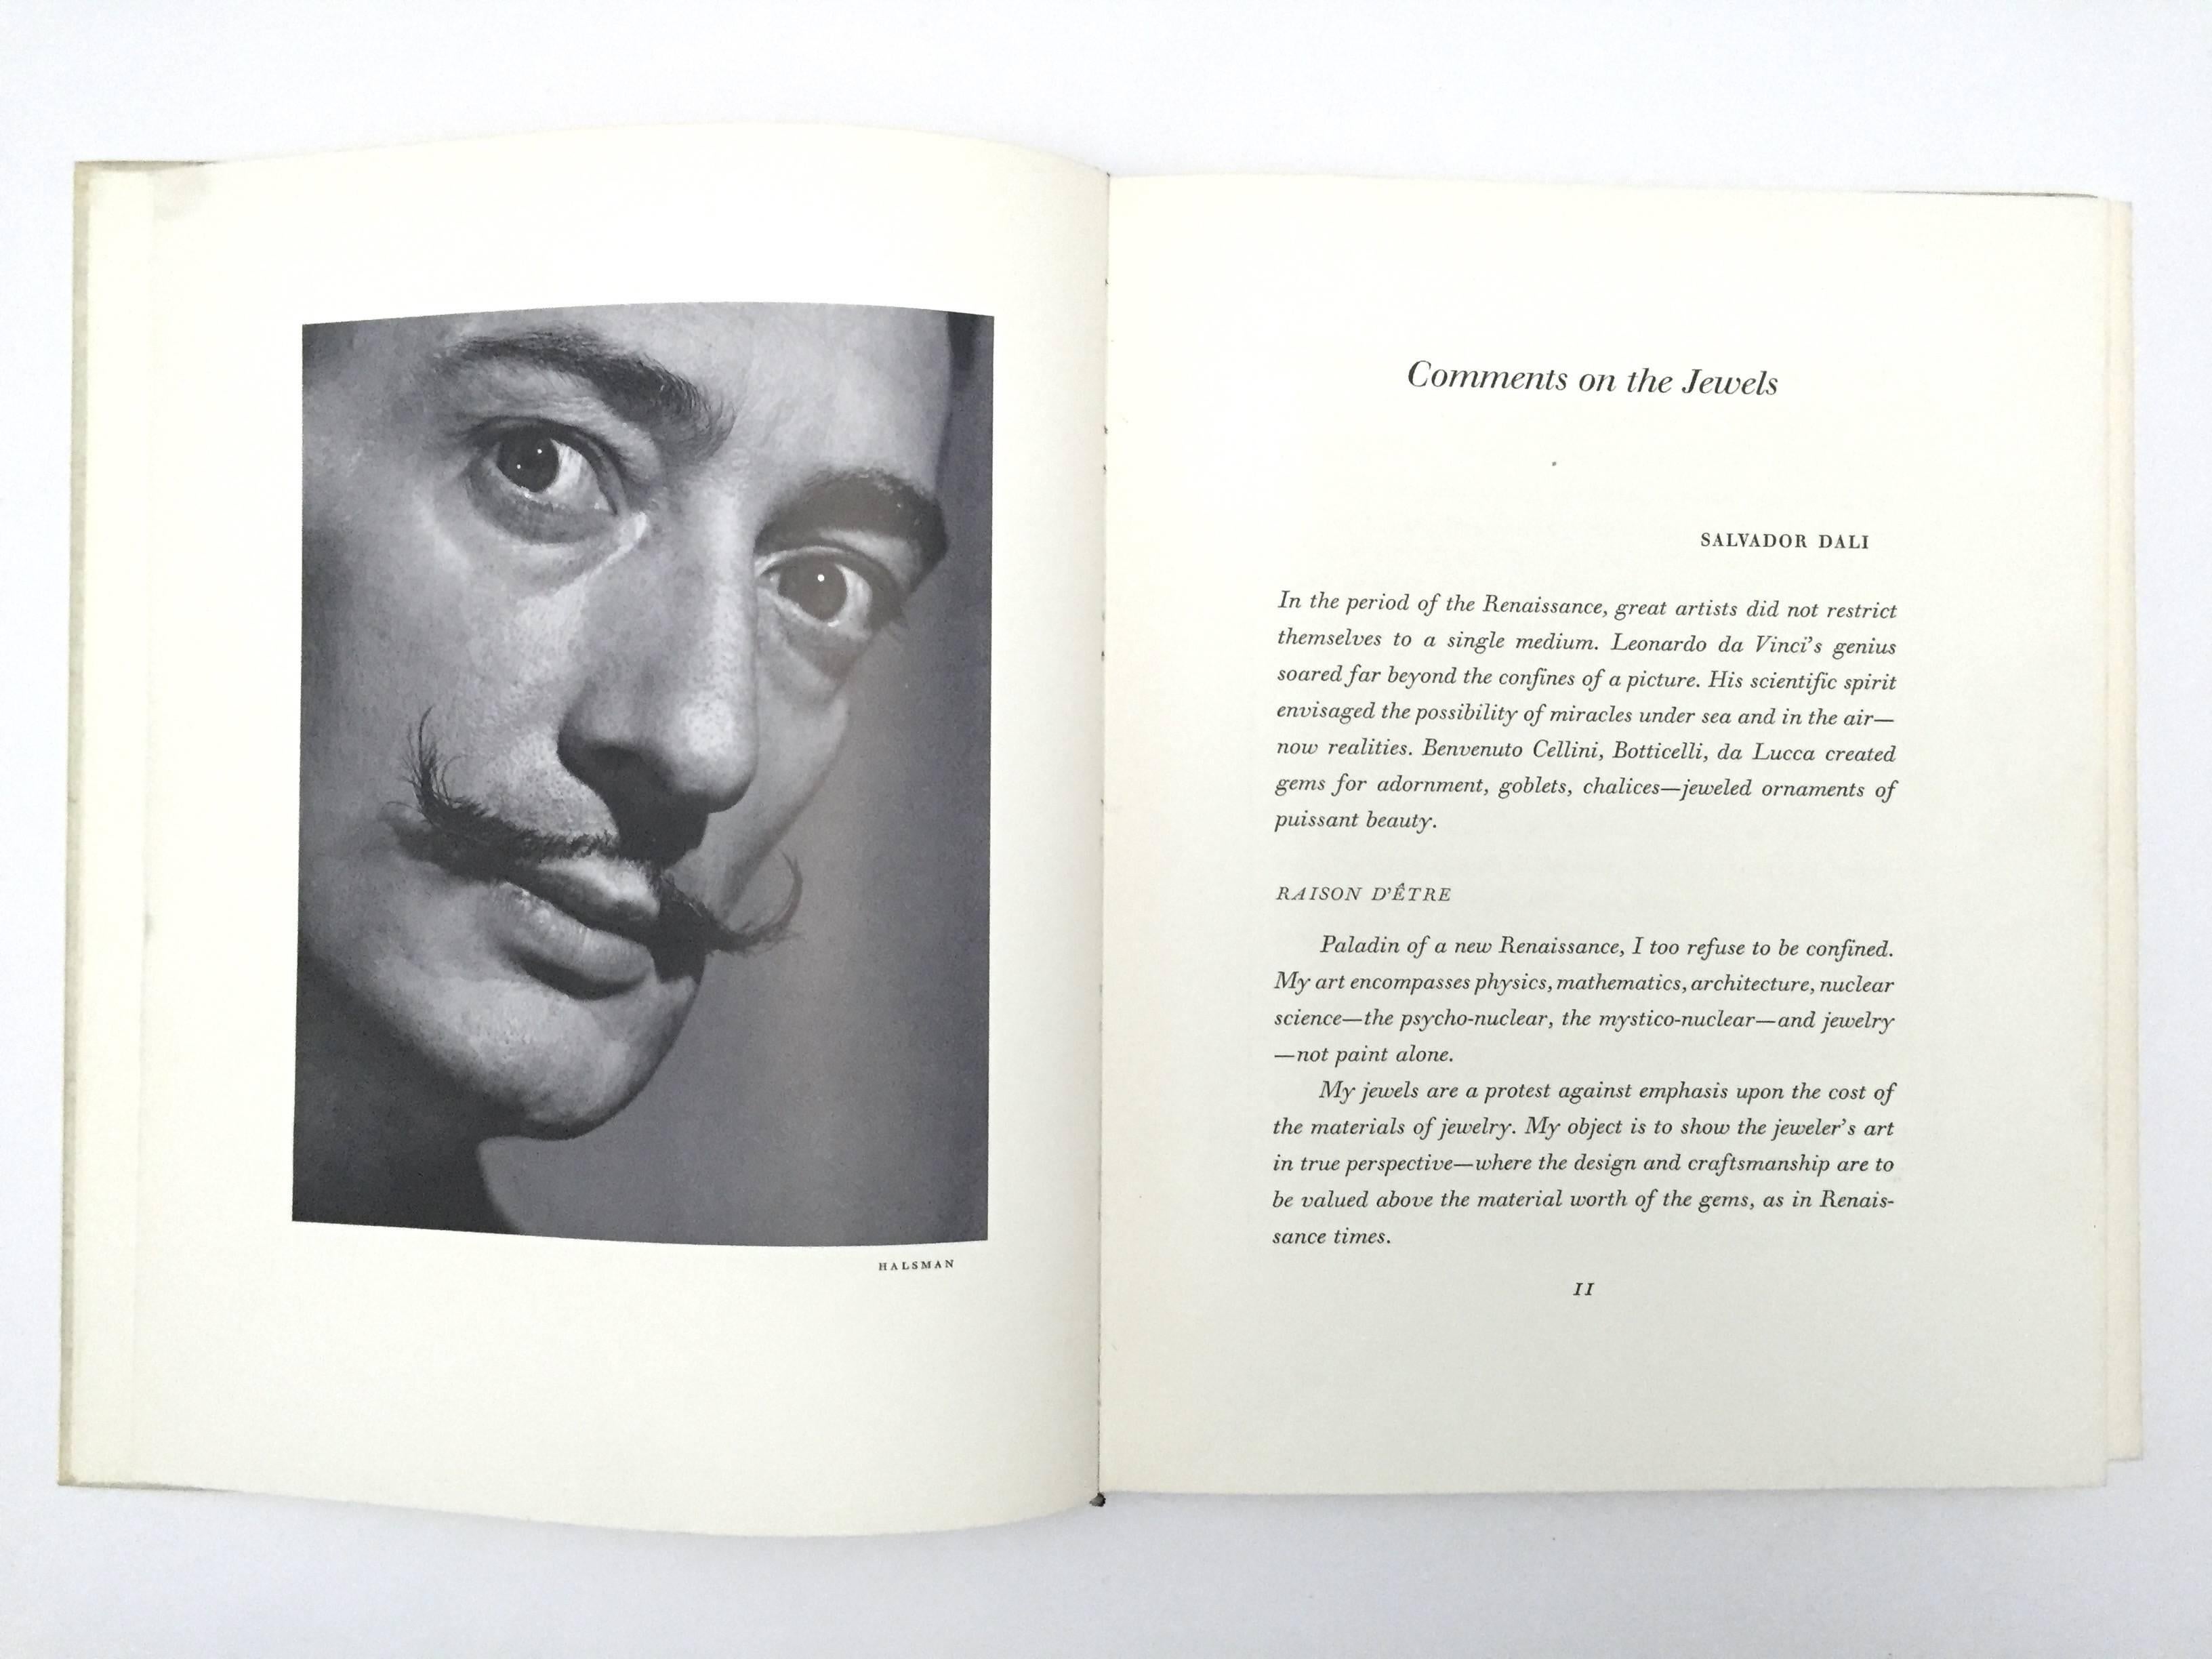 This beautiful book showcases the jewels with tipped in photograph plates that Dali created in collaboration with the great jewellers. The designs follow many of the themes and motifs he addresses in his other works, with biblical imagery and